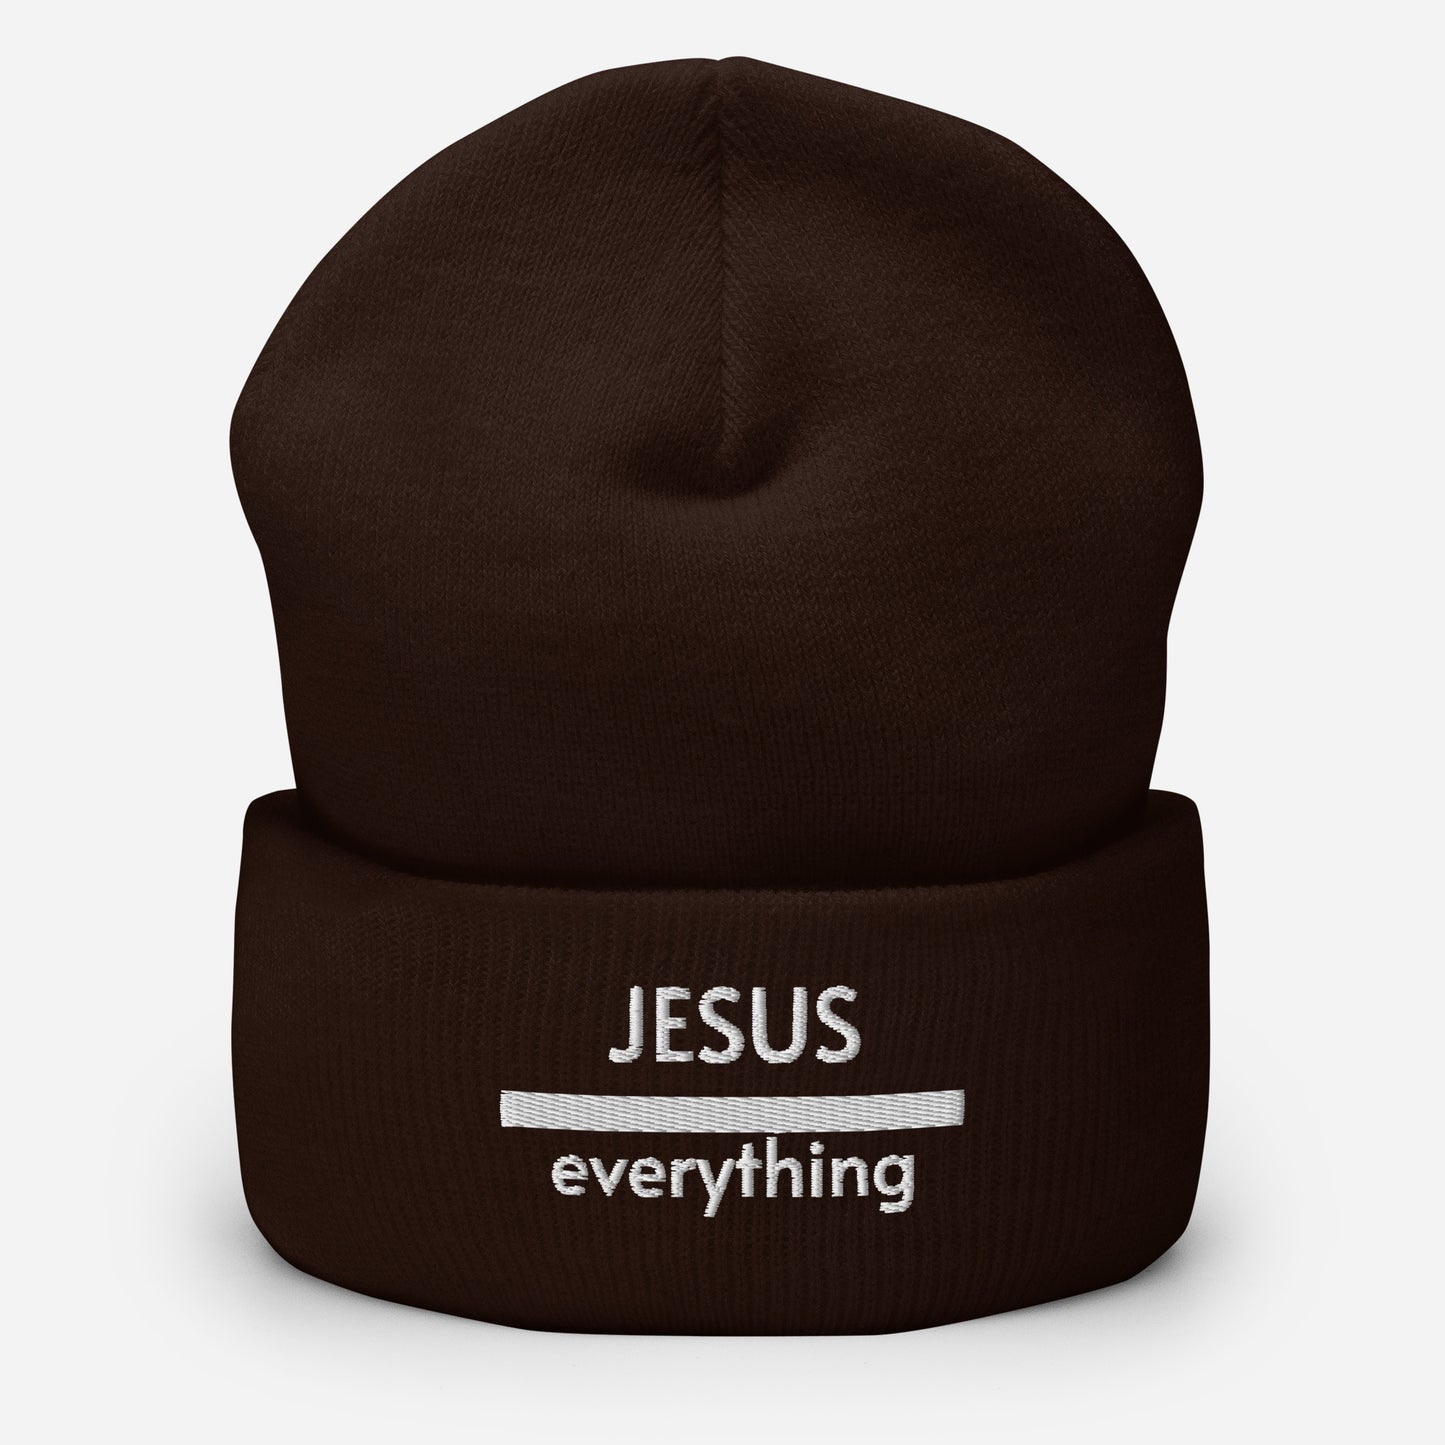 Jesus Over Everything Cuffed Beanie